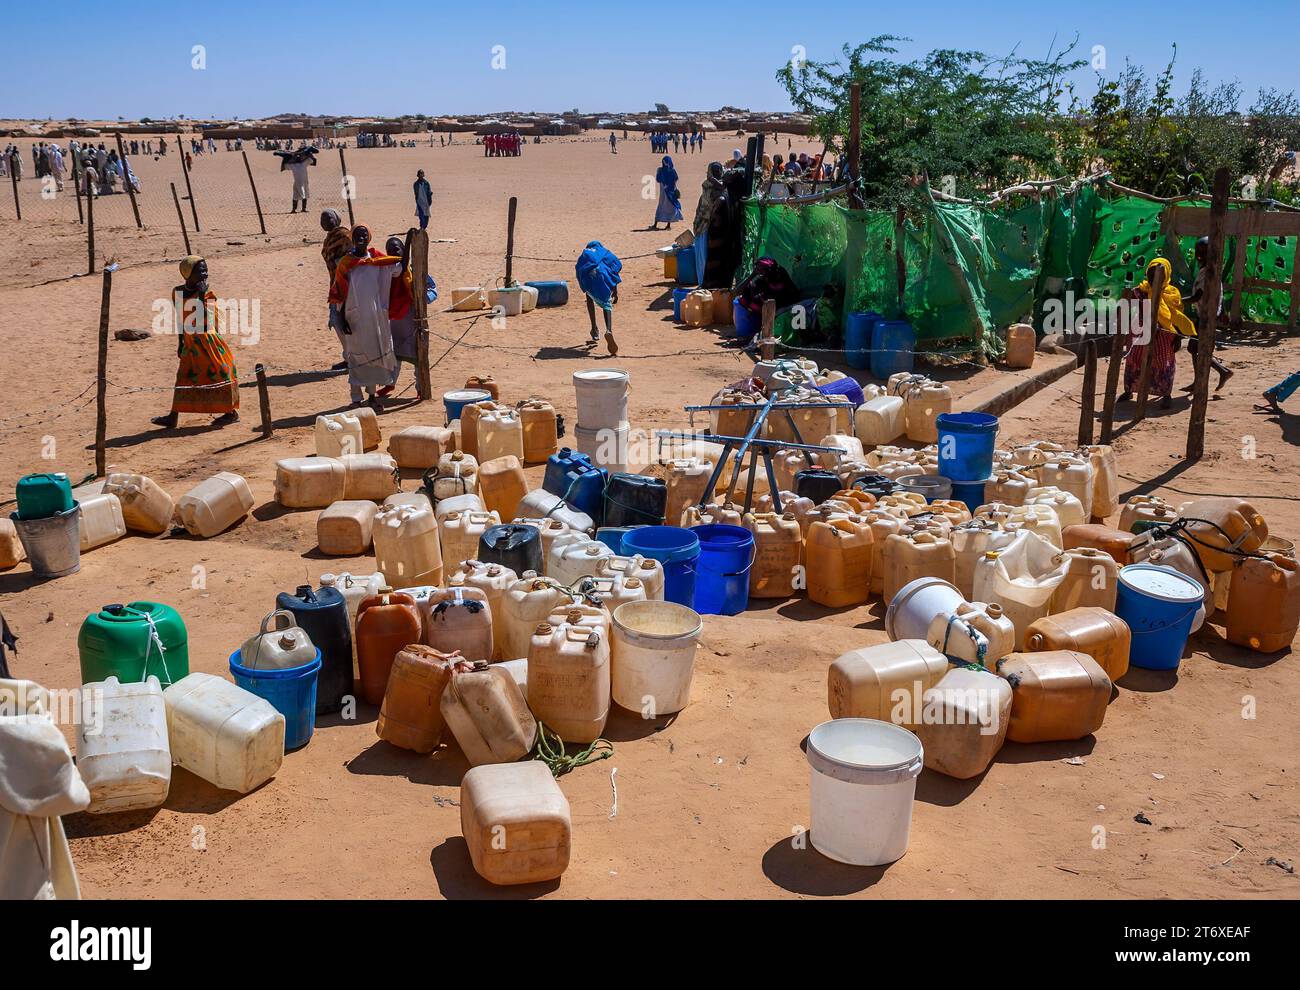 Waterdistribution in Ouri Cassoni refugeecamp for Darfuri refugees in northern Chad Stock Photo